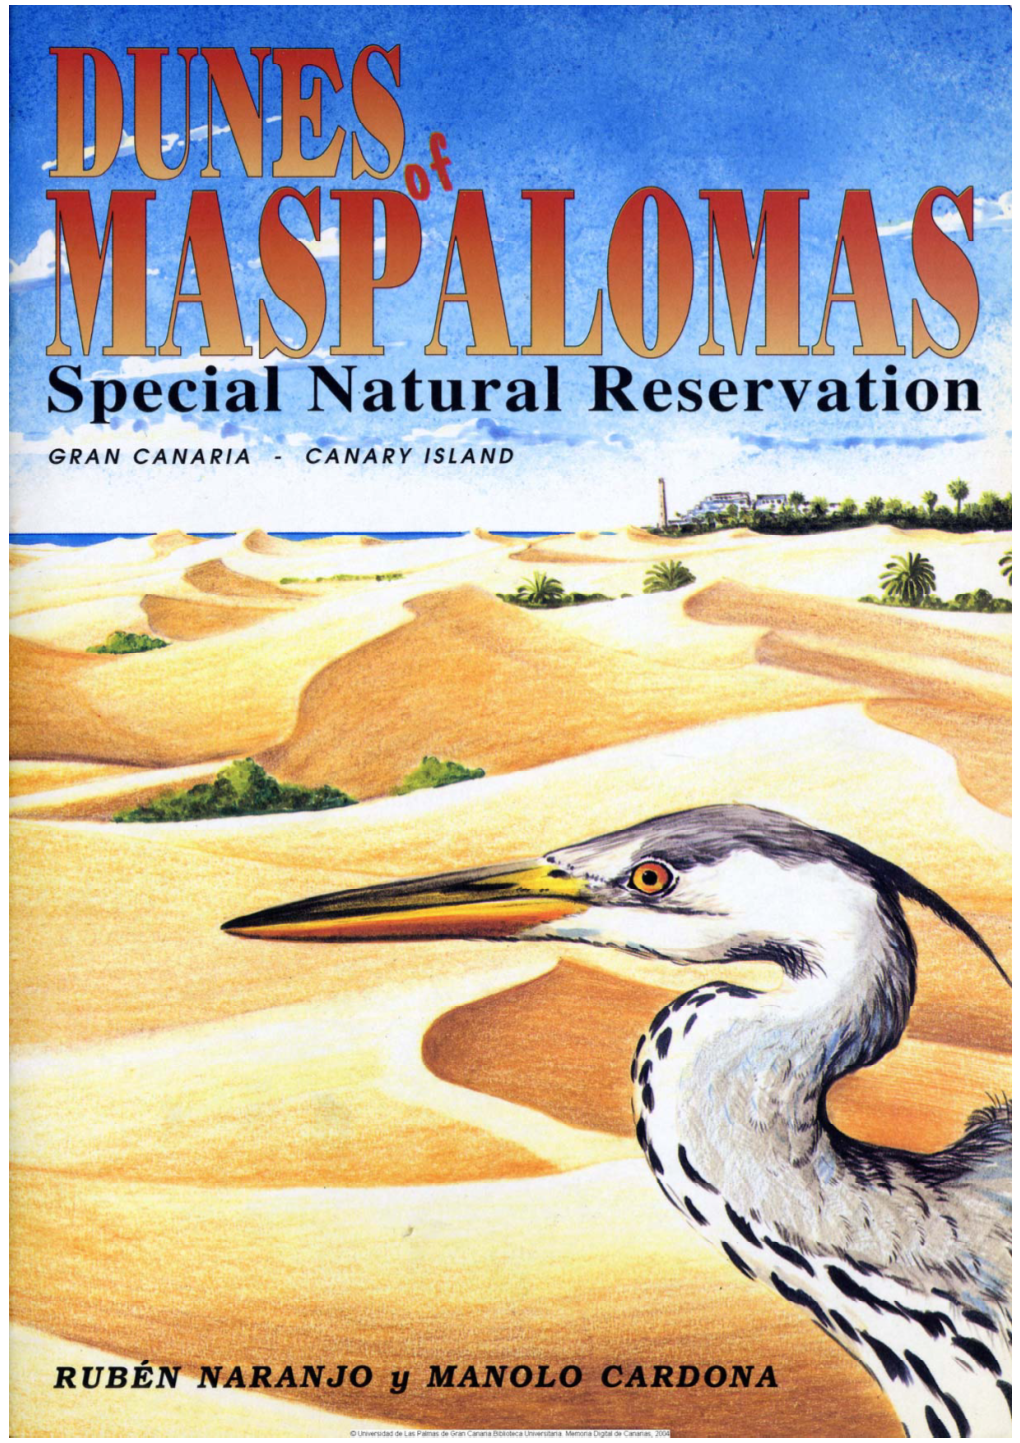 Dunes of Maspalomas: Special Natural Reservation